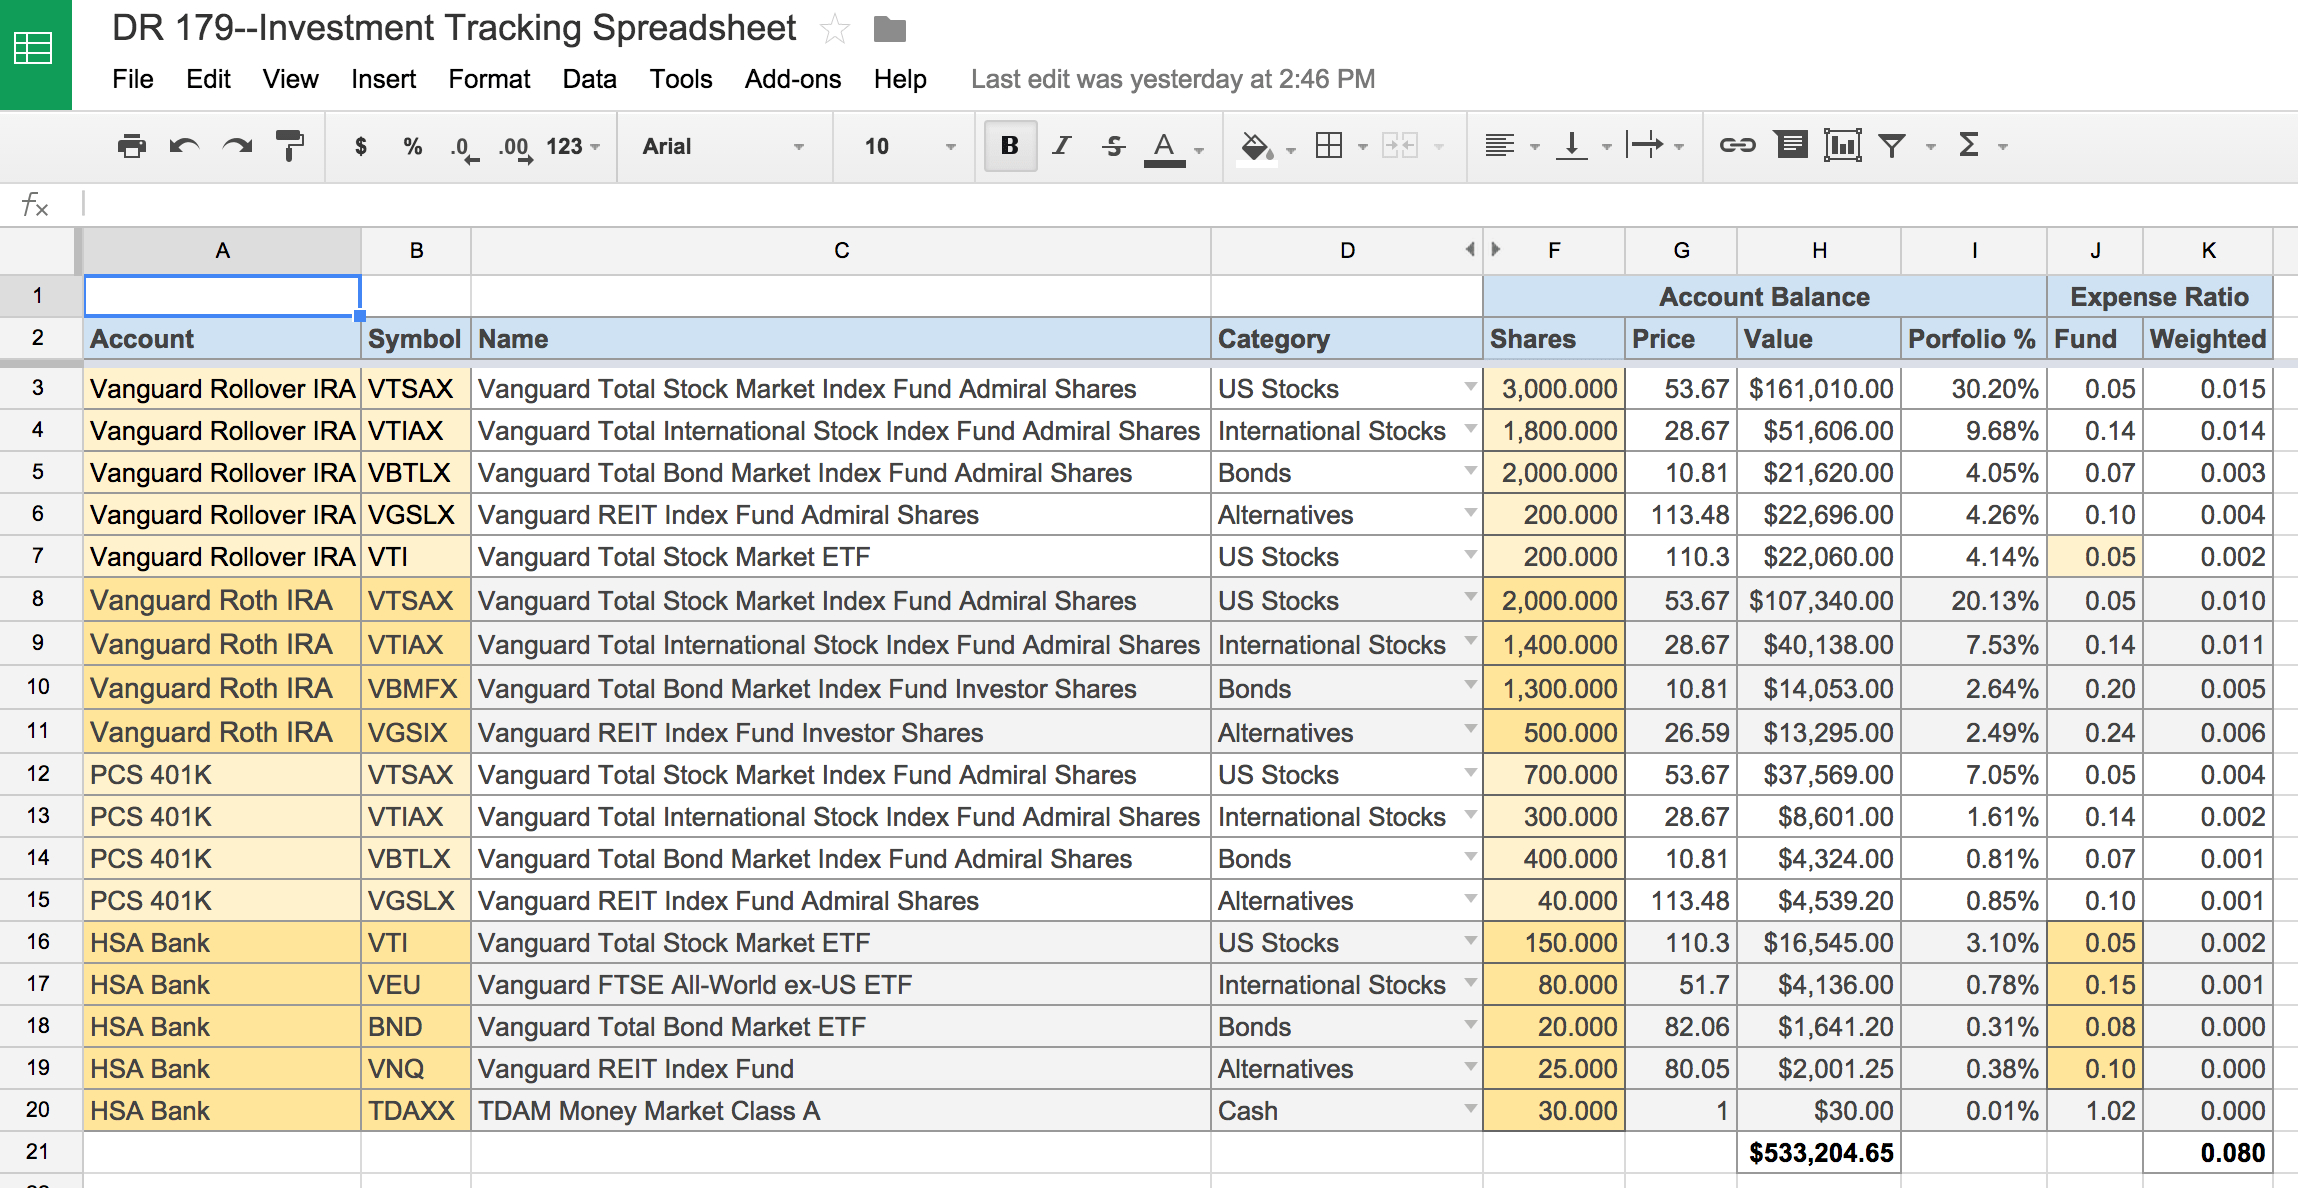 Membership Tracking Spreadsheet Regarding An Awesome And Free Investment Tracking Spreadsheet